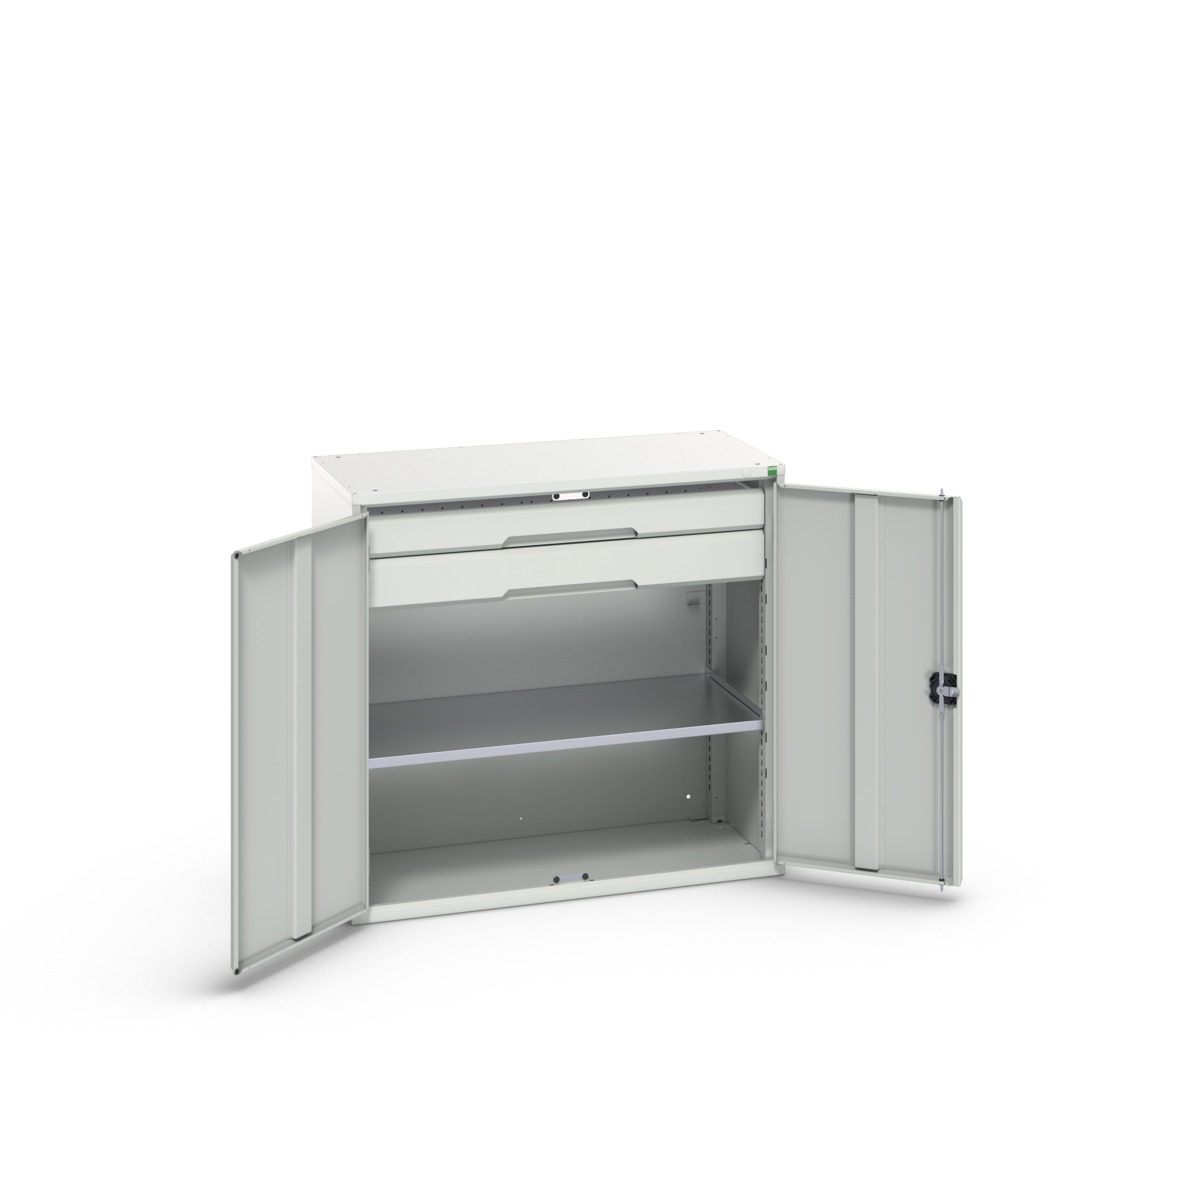 16926553.16 - verso kitted cupboard